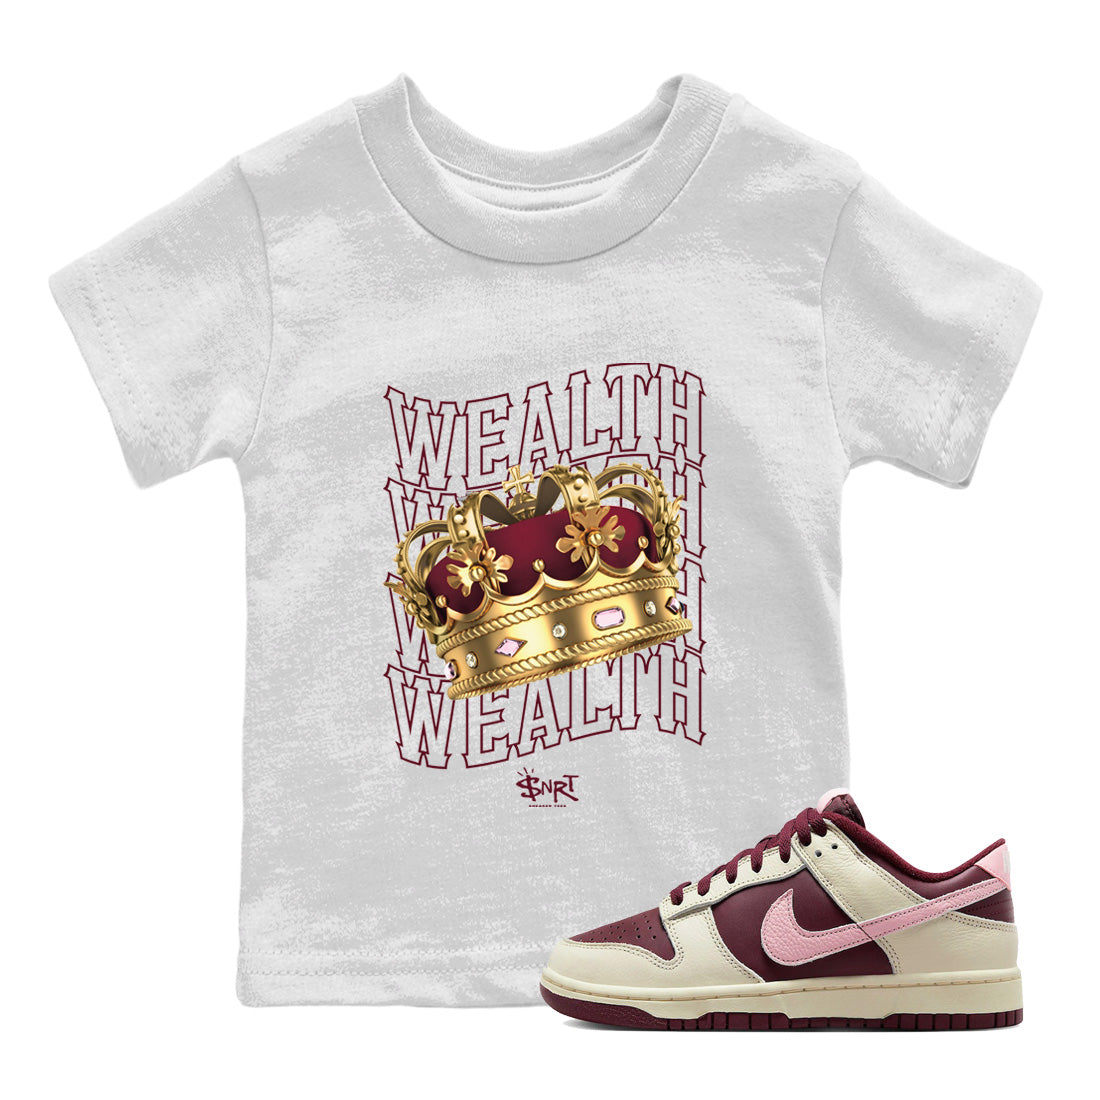 Dunk Valentines Day Sneaker Tees Drip Gear Zone Wealth Sneaker Tees Dunk Valentines Day Shirt Kids Shirts